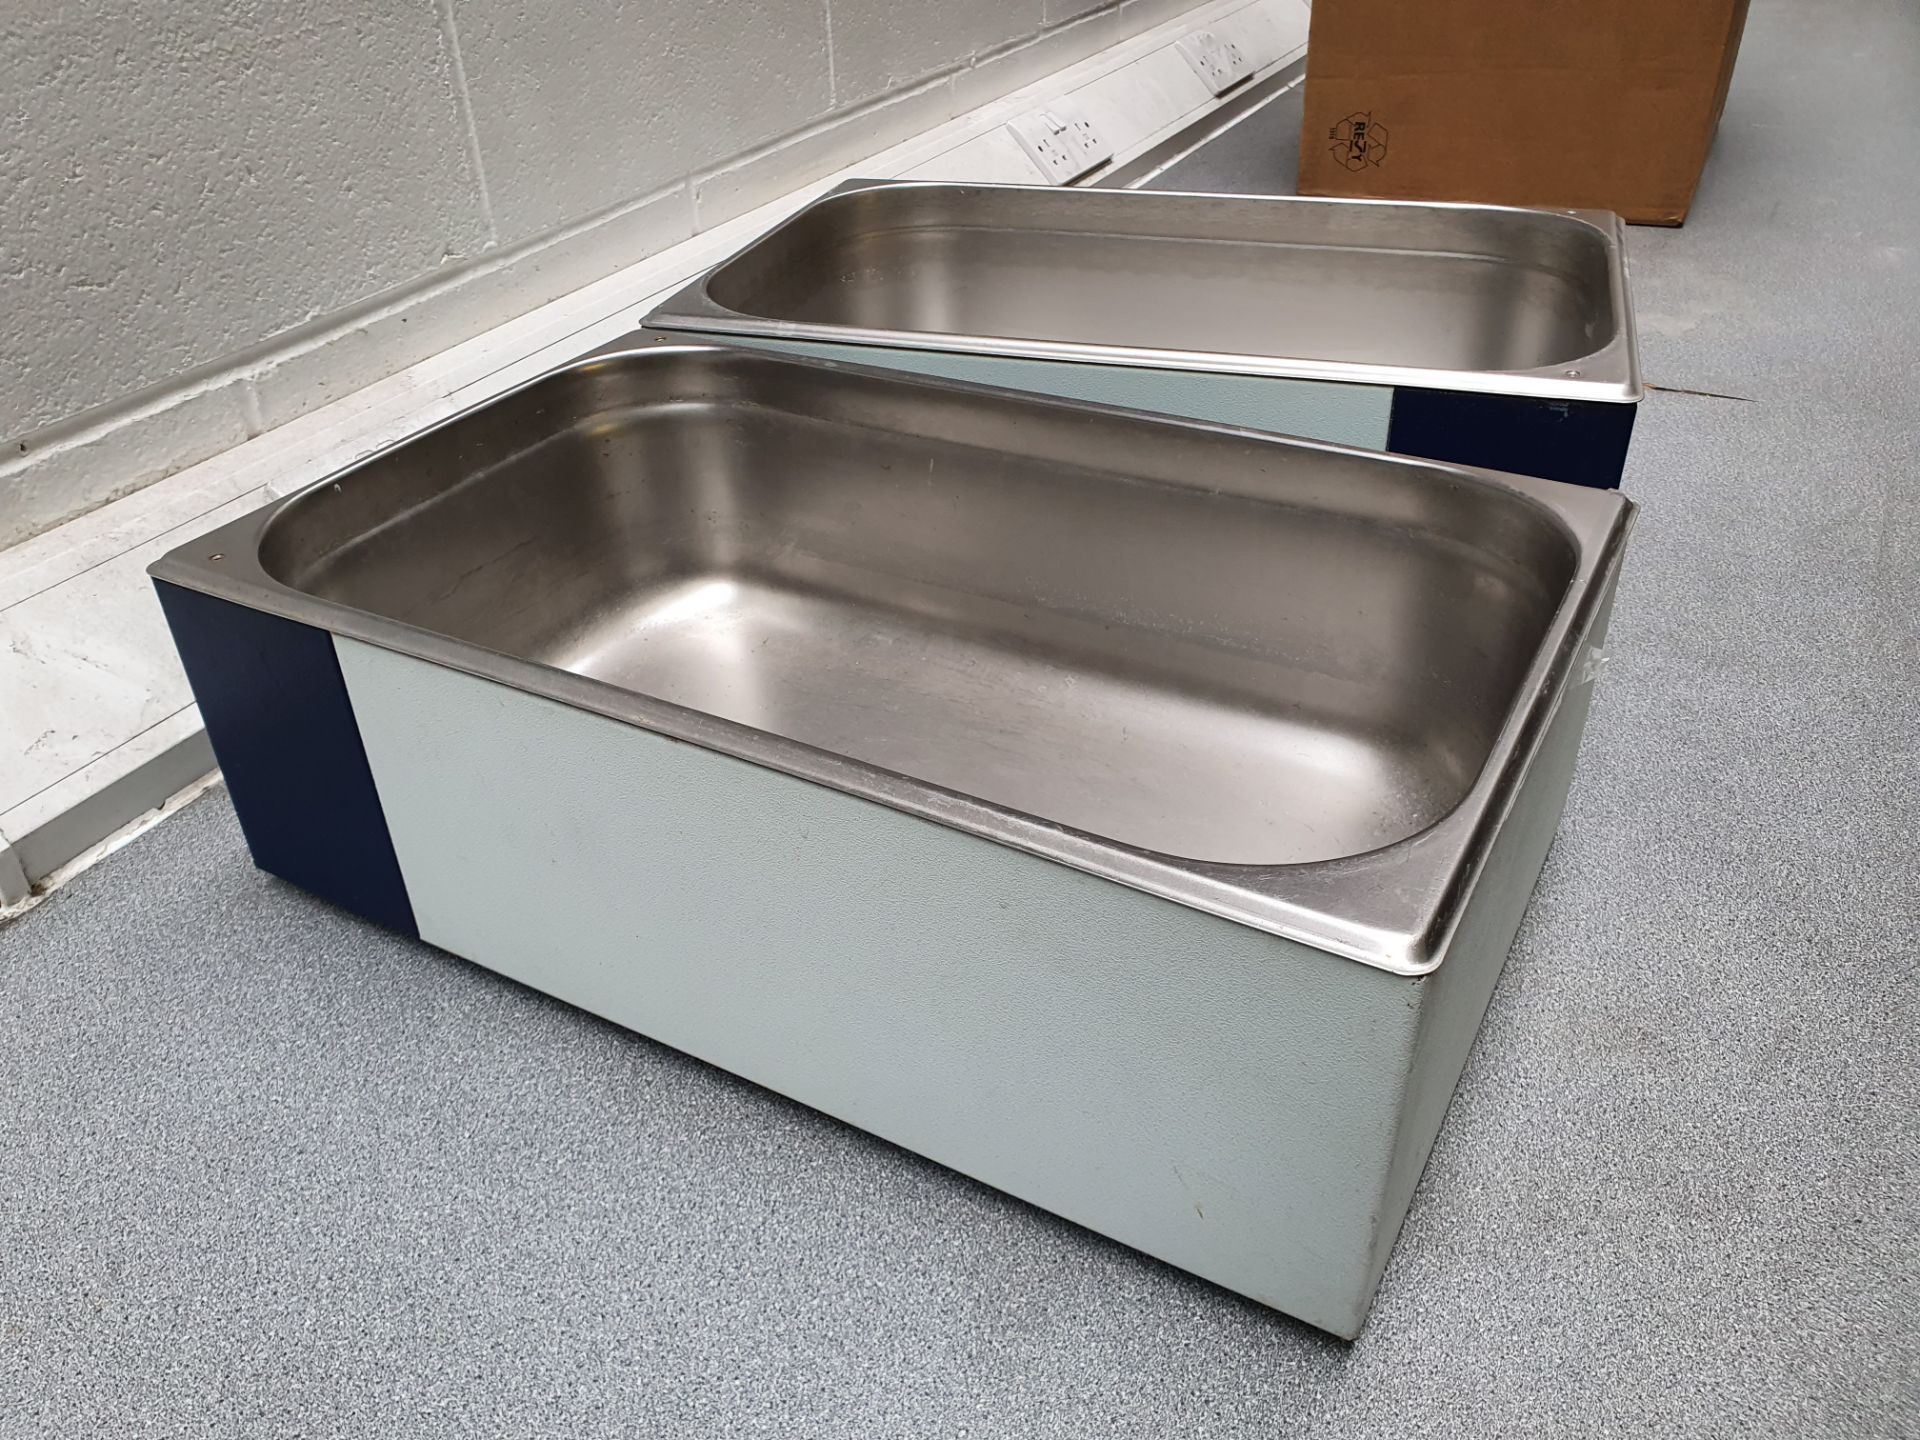 2 x Techne Water Baths - Image 2 of 3